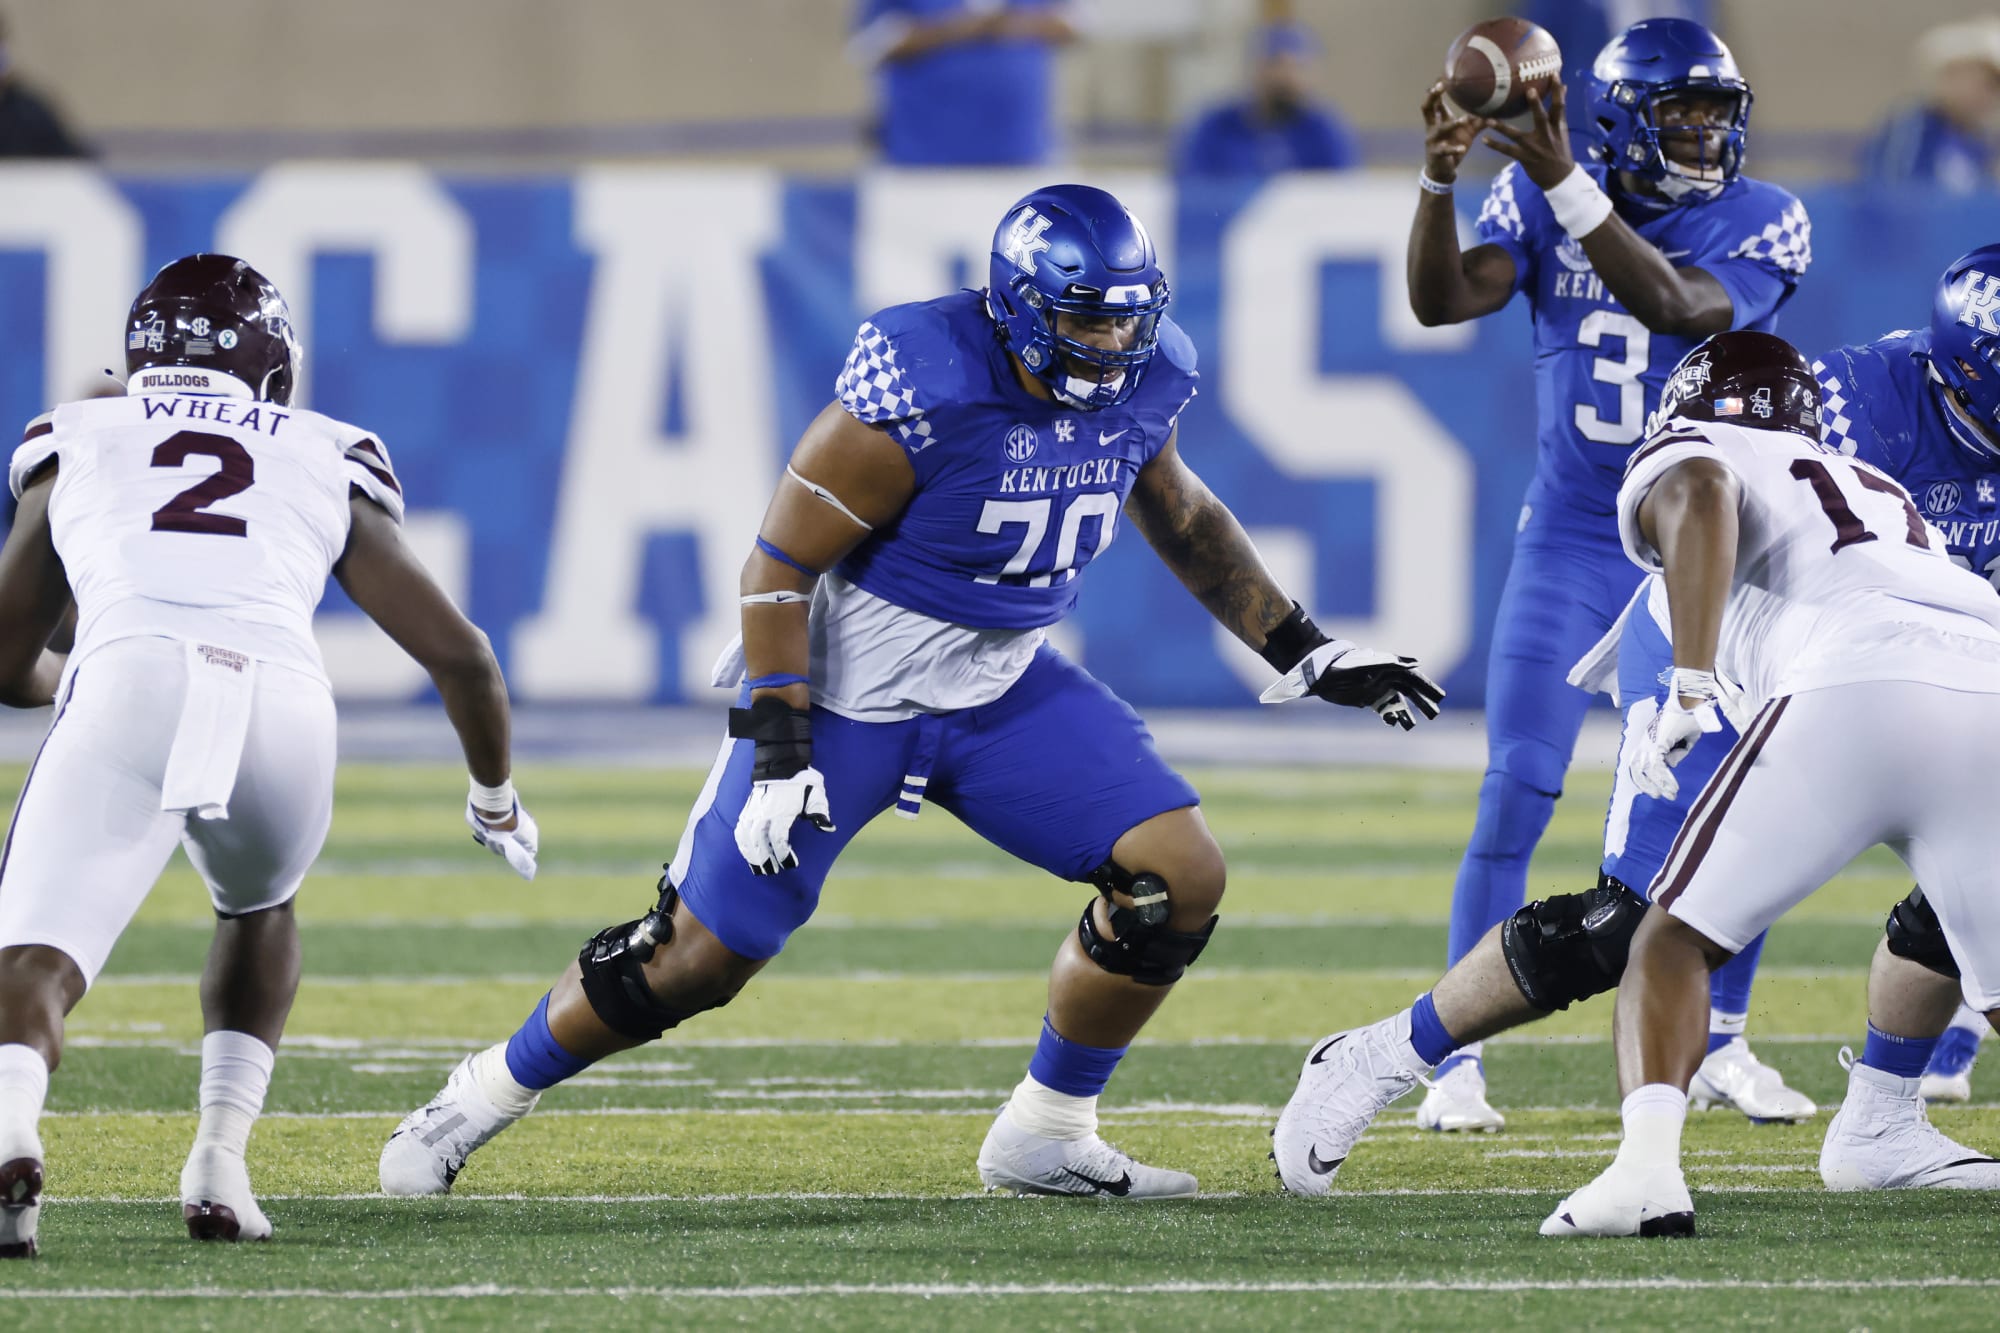 Kentucky football players opt to return for extra year could mean big